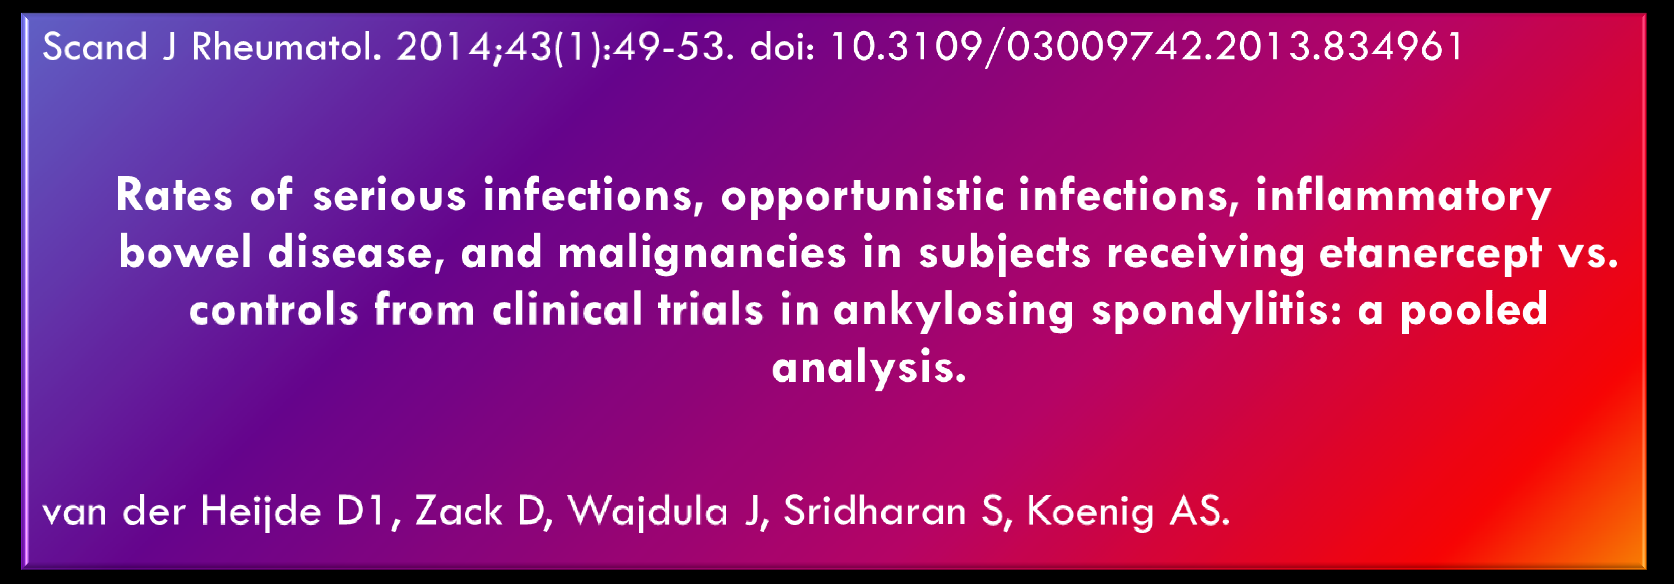 Analyses included 1323 subjects (> 1500 subject-years of treatment). Rate ratios of serious infections and IBD events for etanercept vs. placebo/sulfasalazine during the double-blind studies were 2.